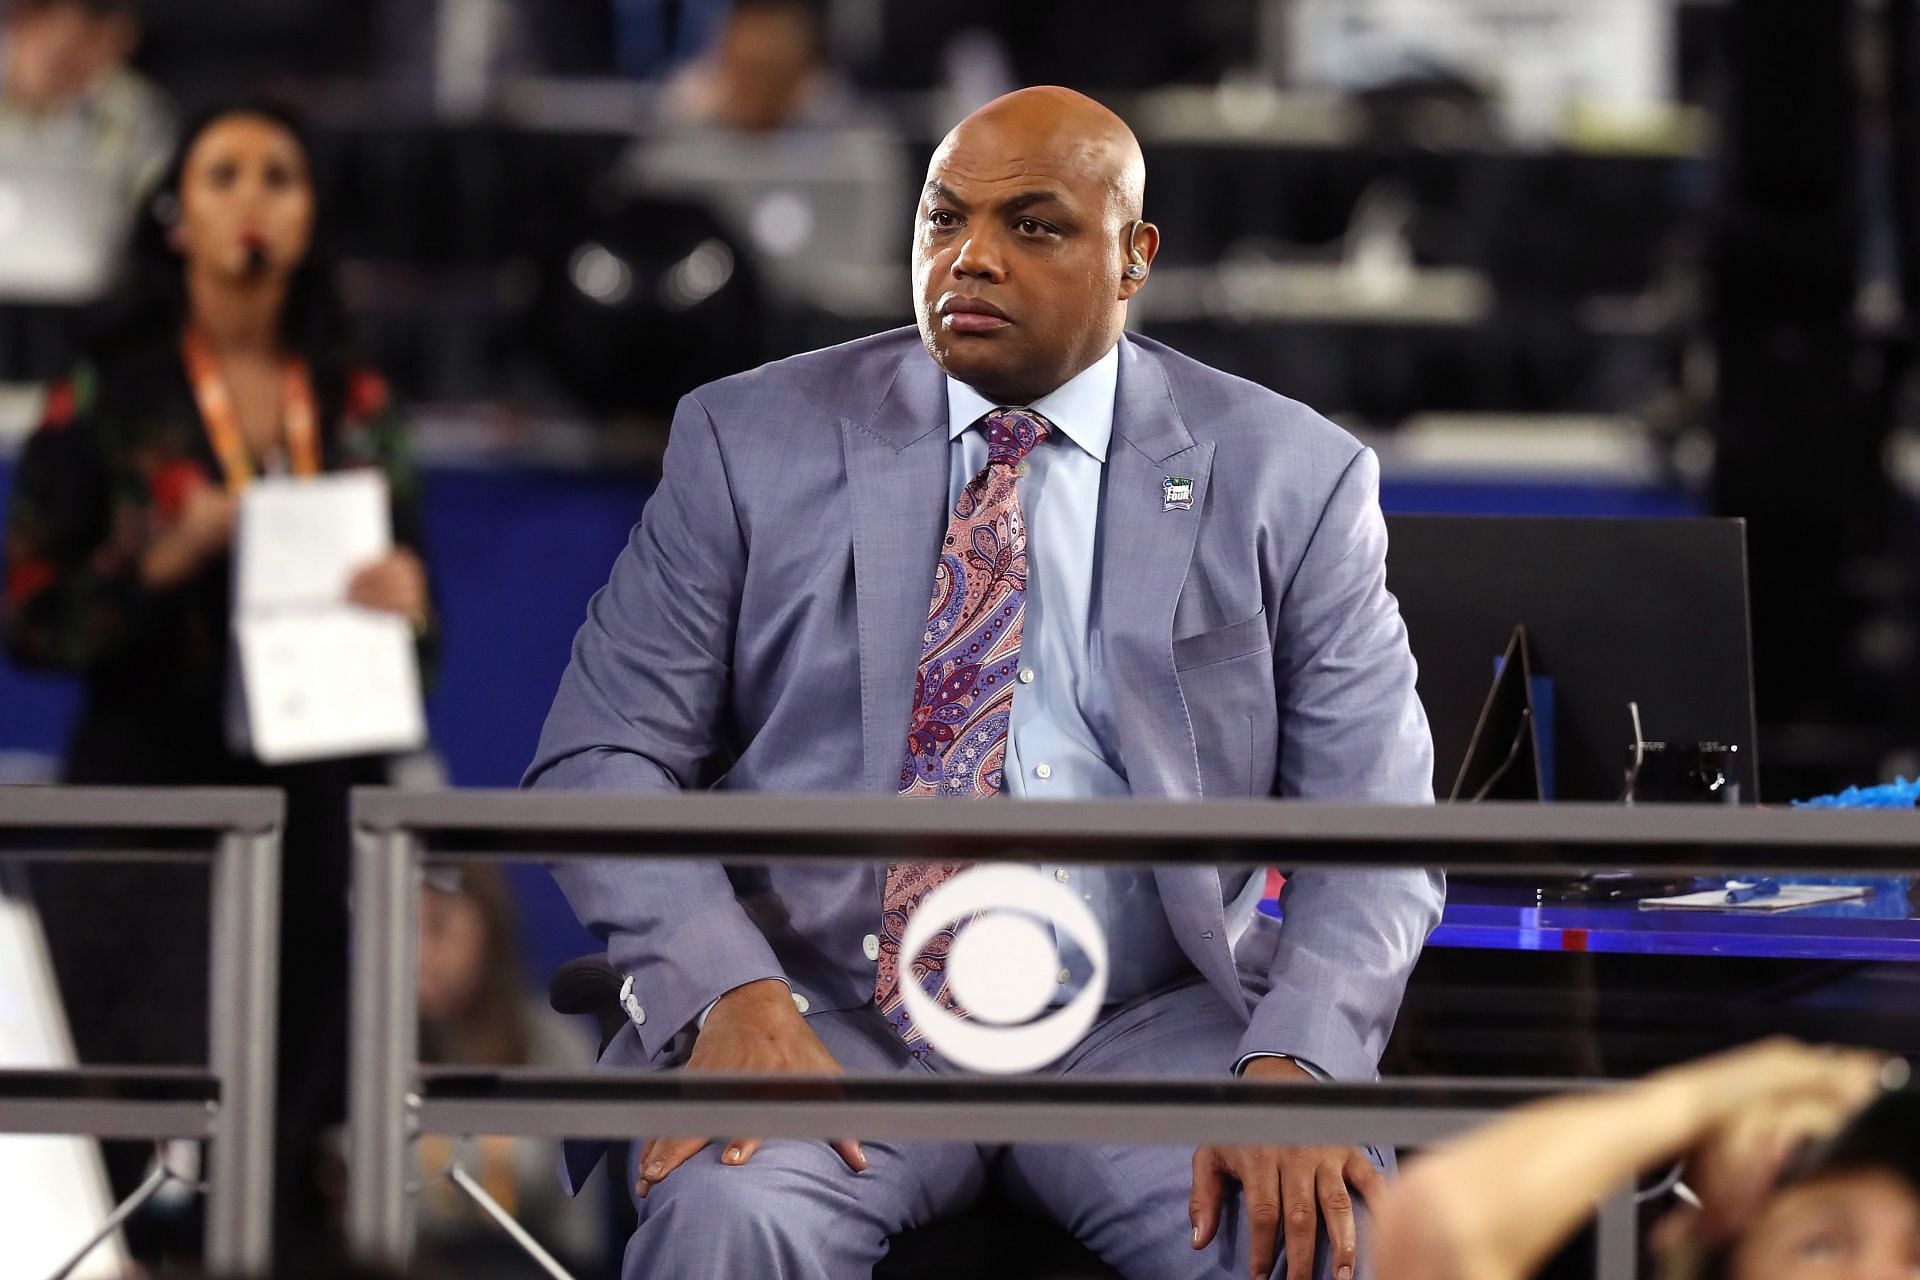 Sir' Charles Barkley steals the spotlight at announcement of NHL's